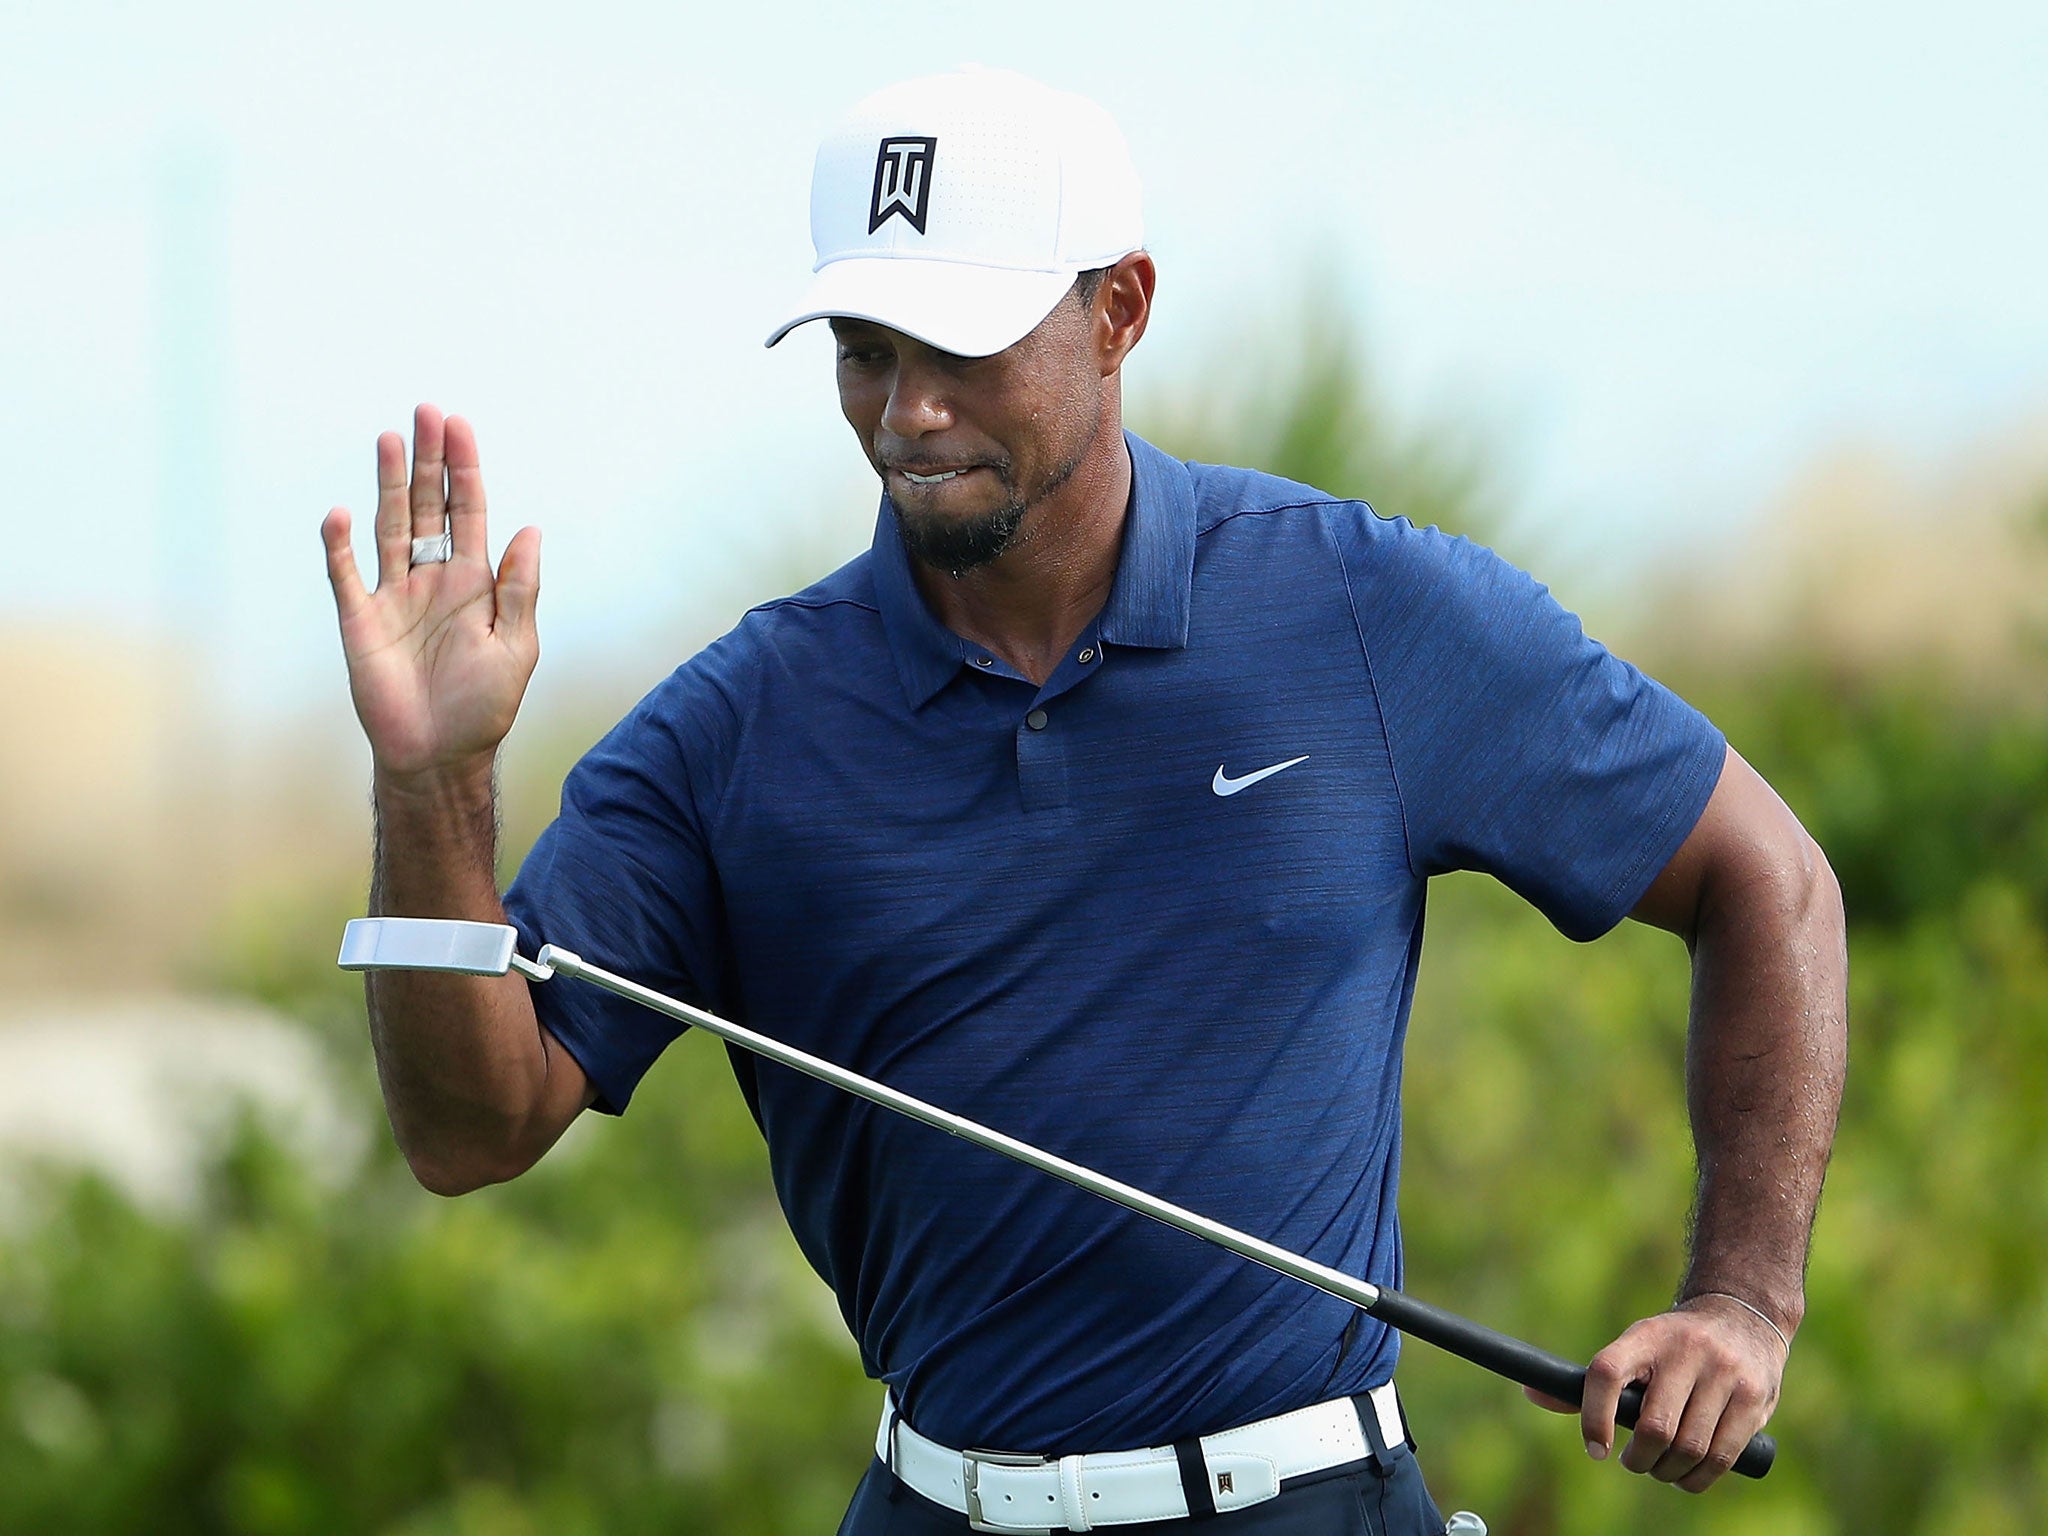 Woods started the competition on his own after Justin Rose pulled out